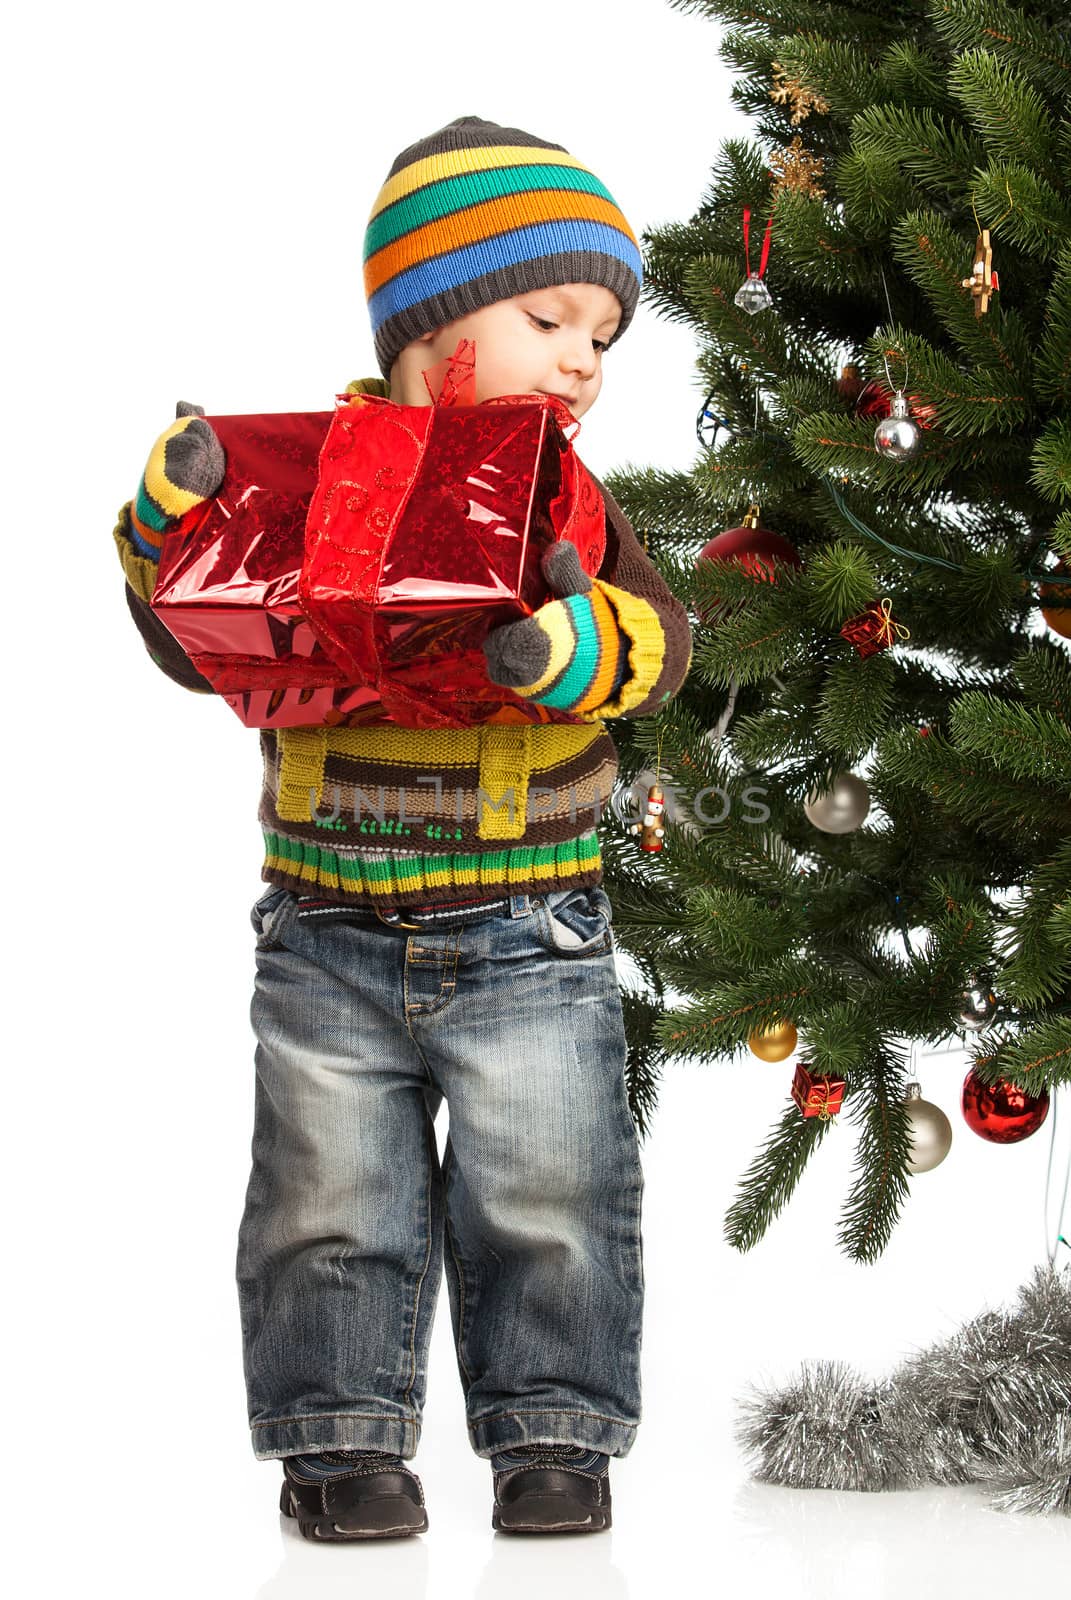 Cute little boy with gift near Christmas tree by photobac